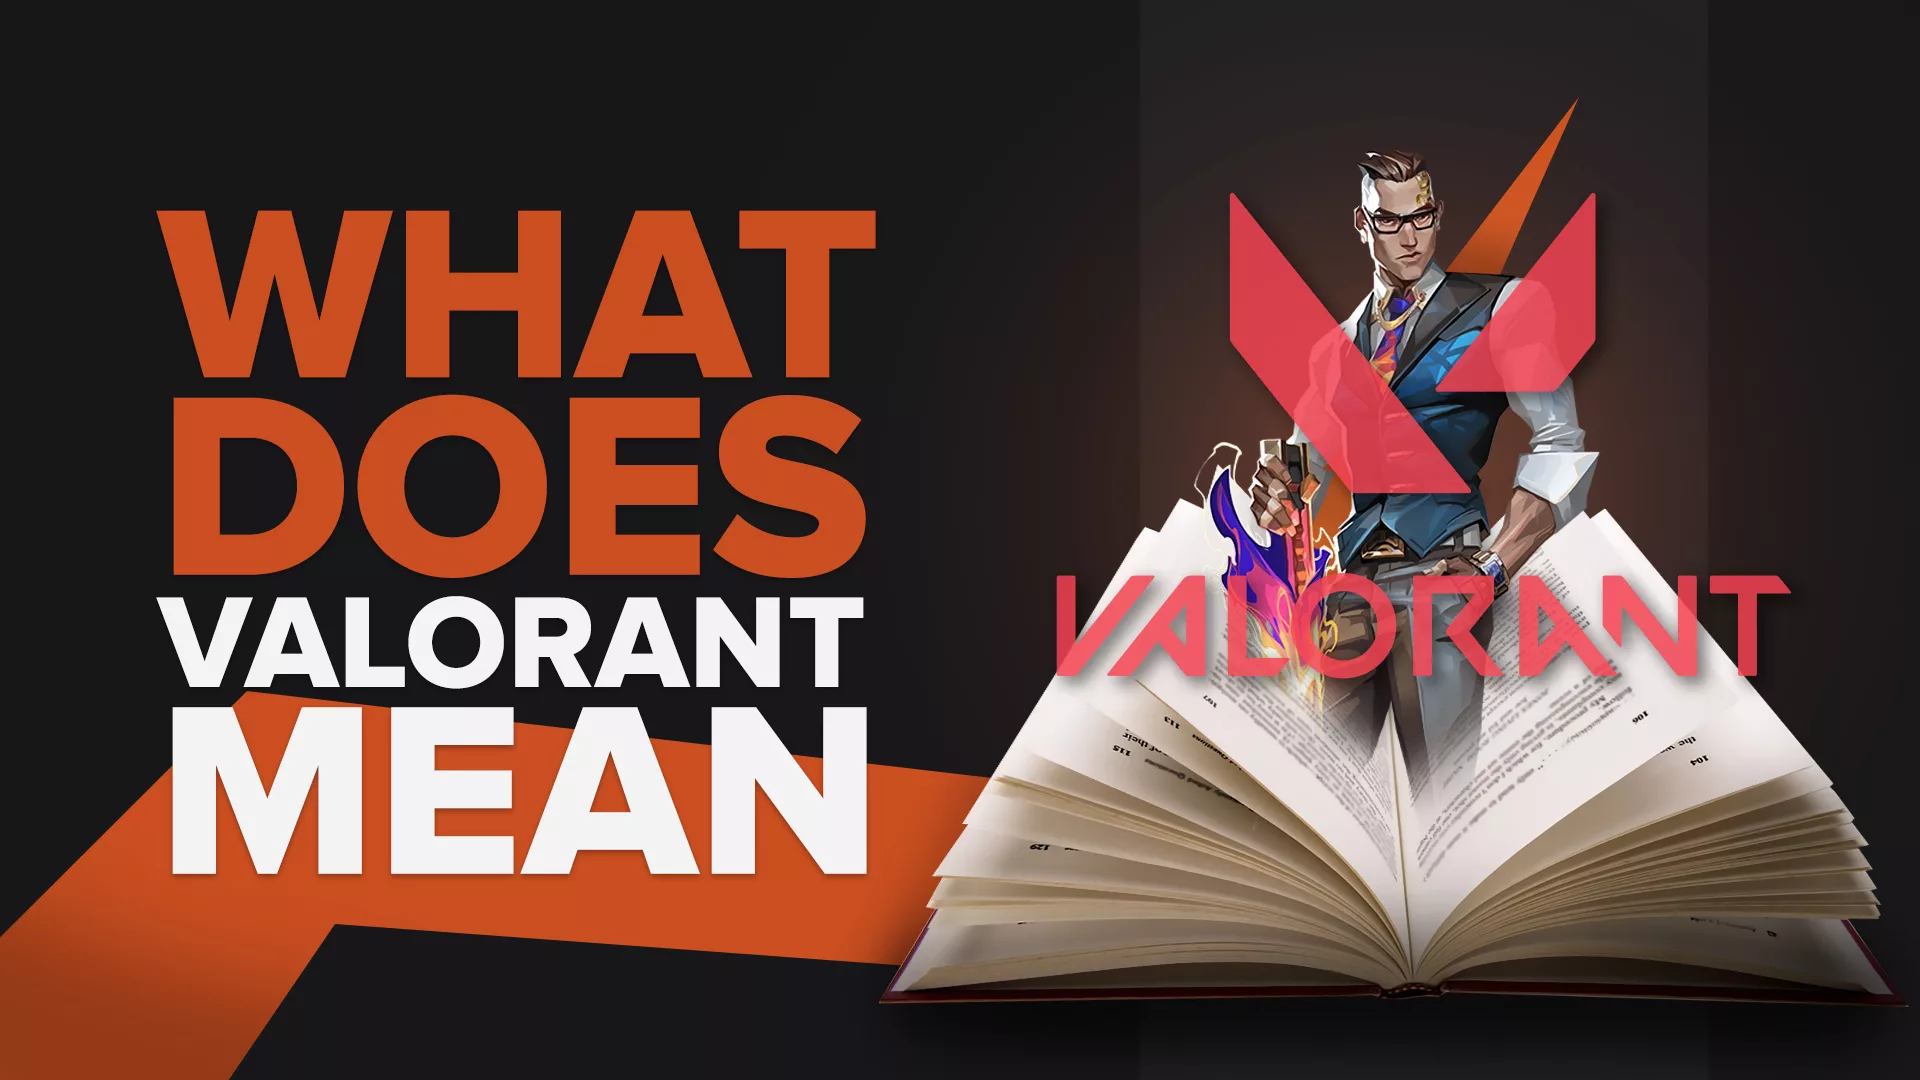 What does Valorant mean?